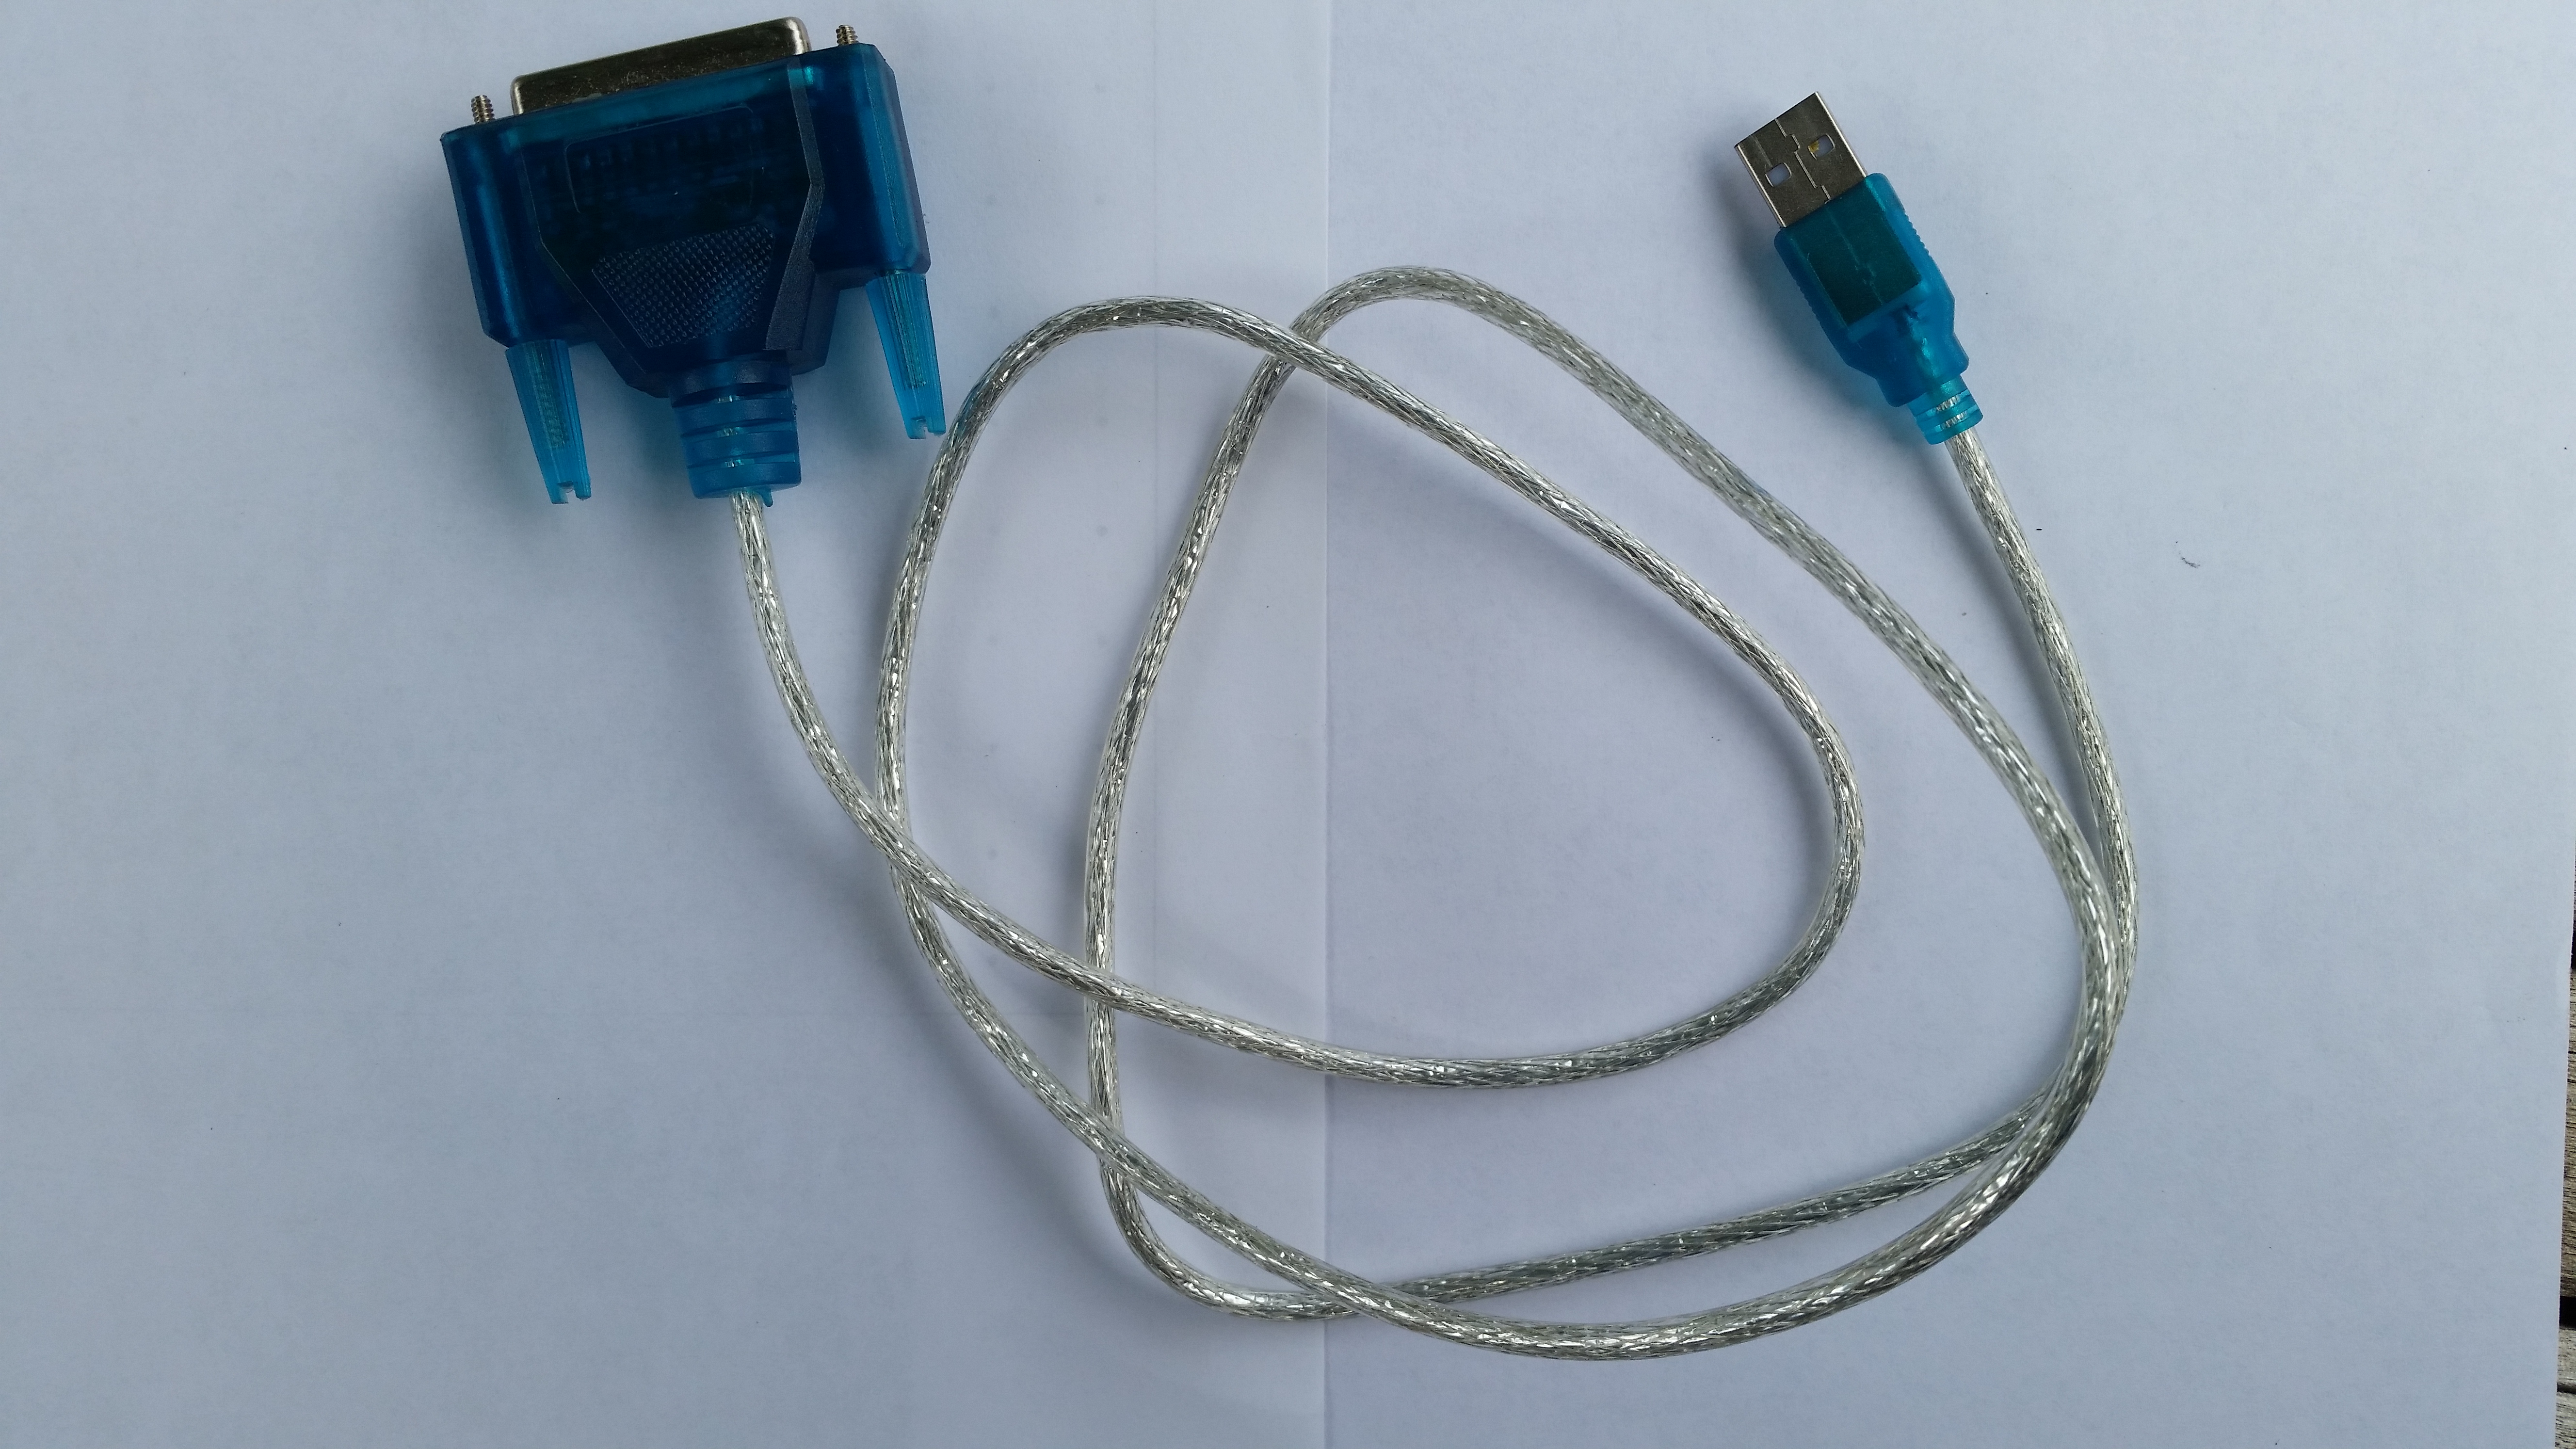 USB to Parallel port cable